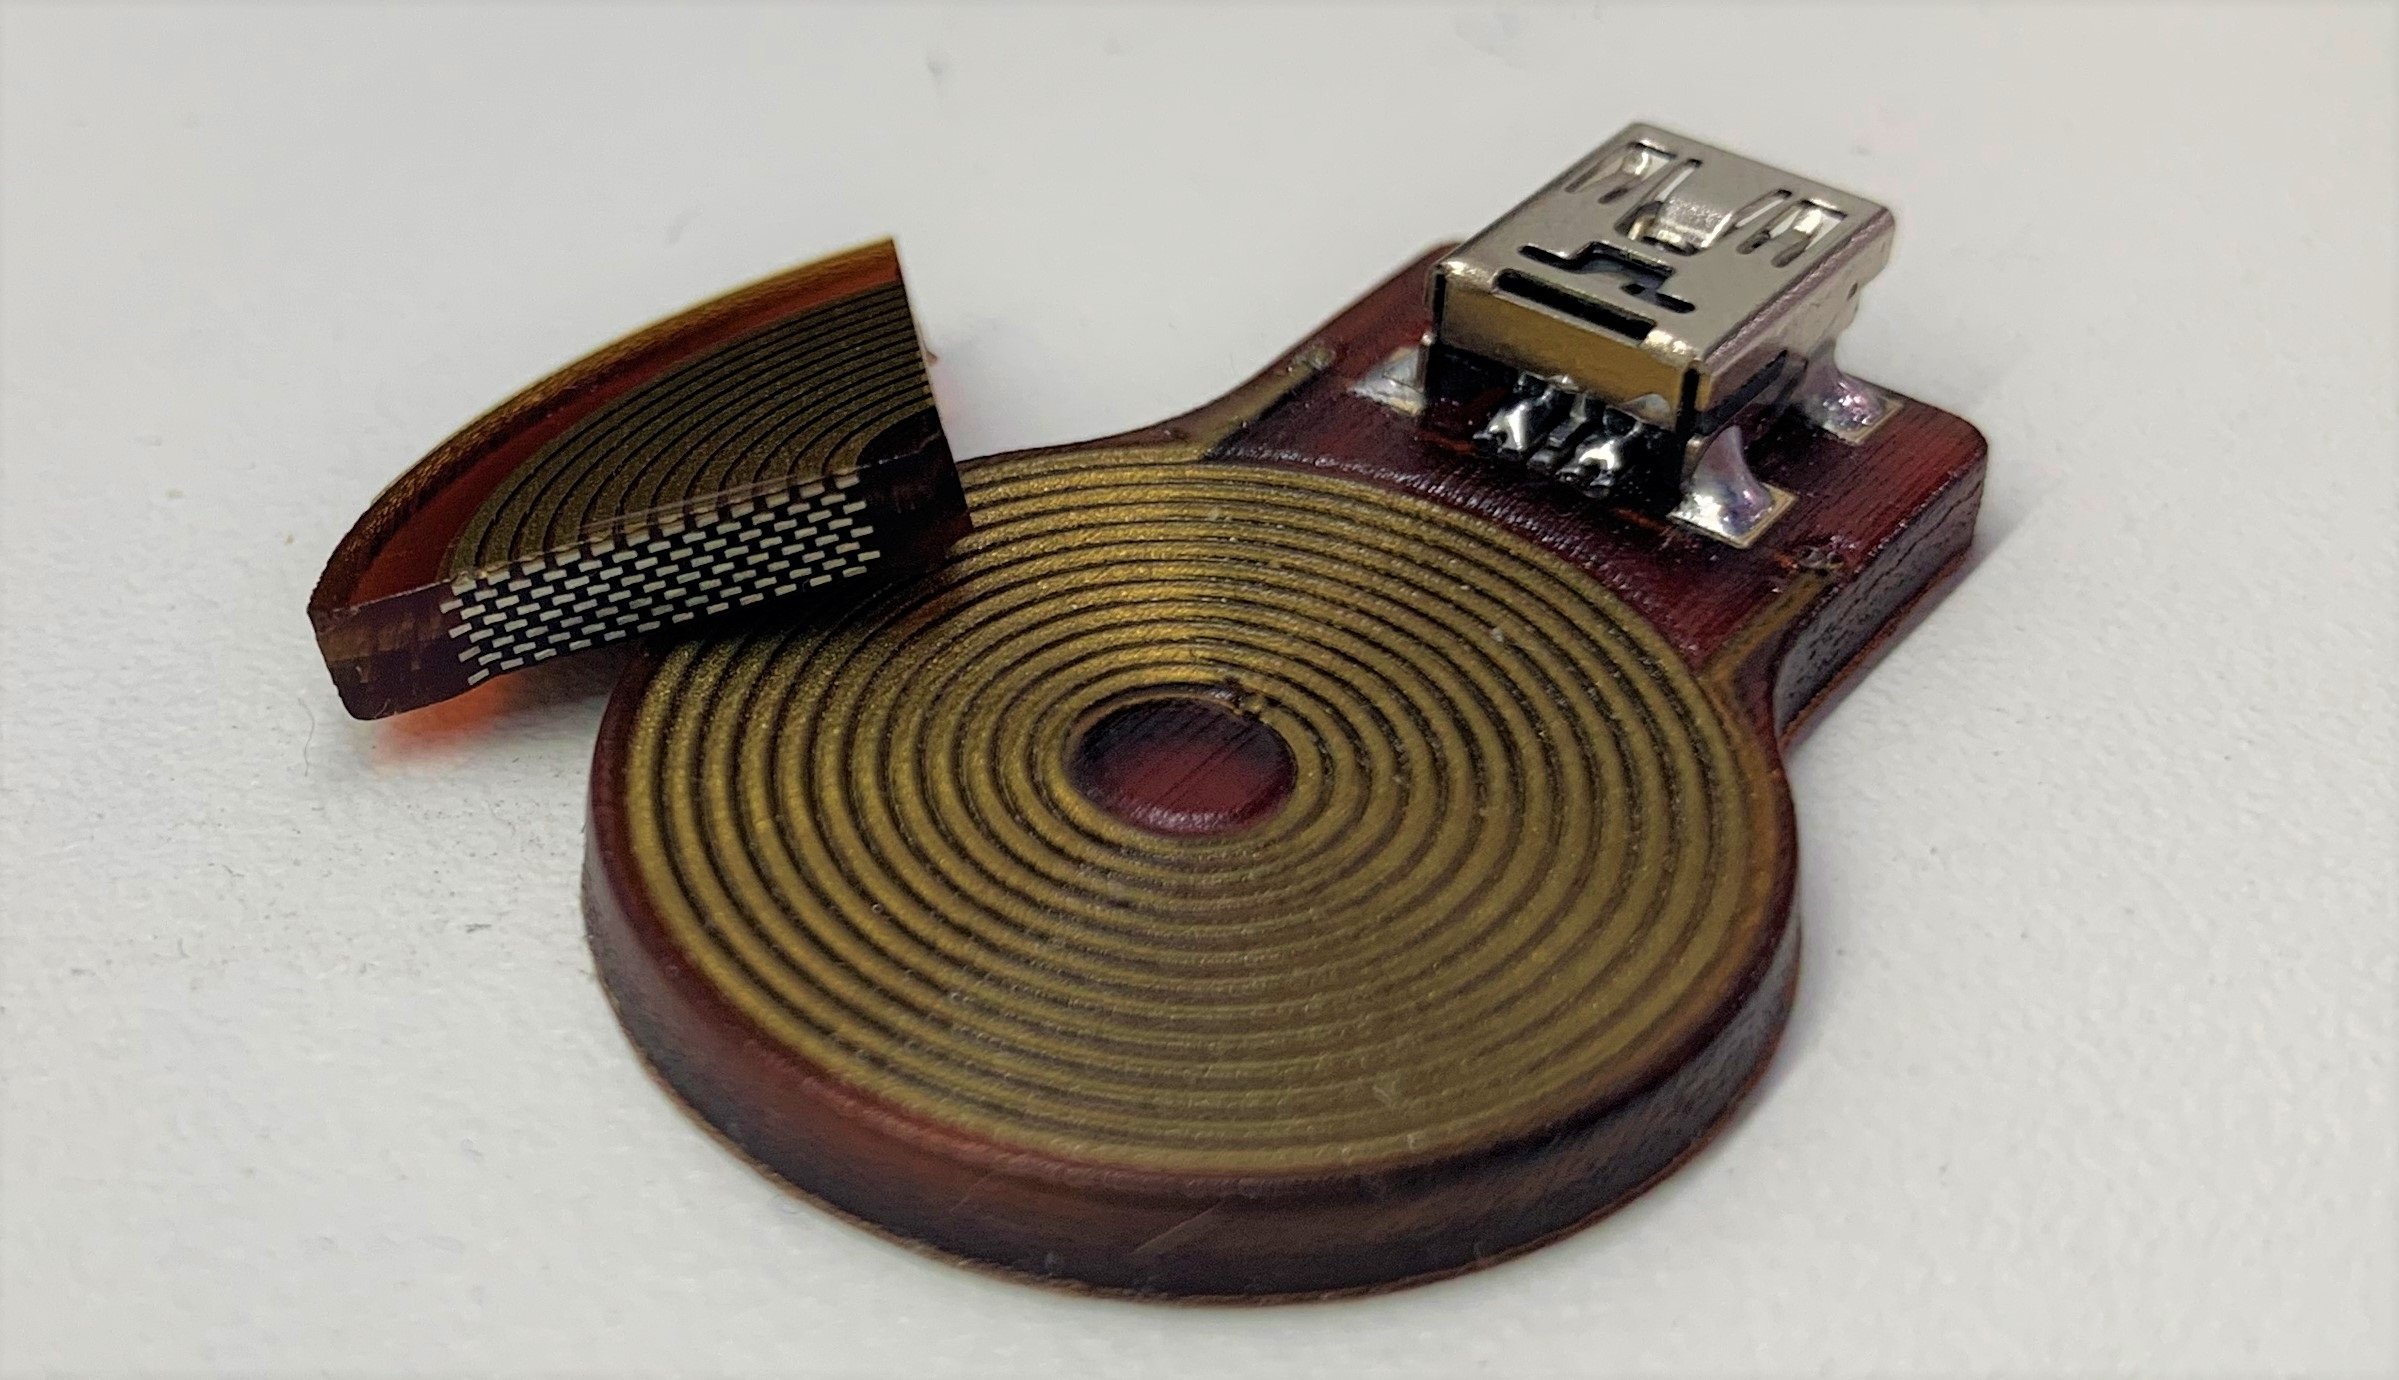 A 3D-printed electromagnetic coil shows electromagnetic coil applications made possible with additive manufacturing.